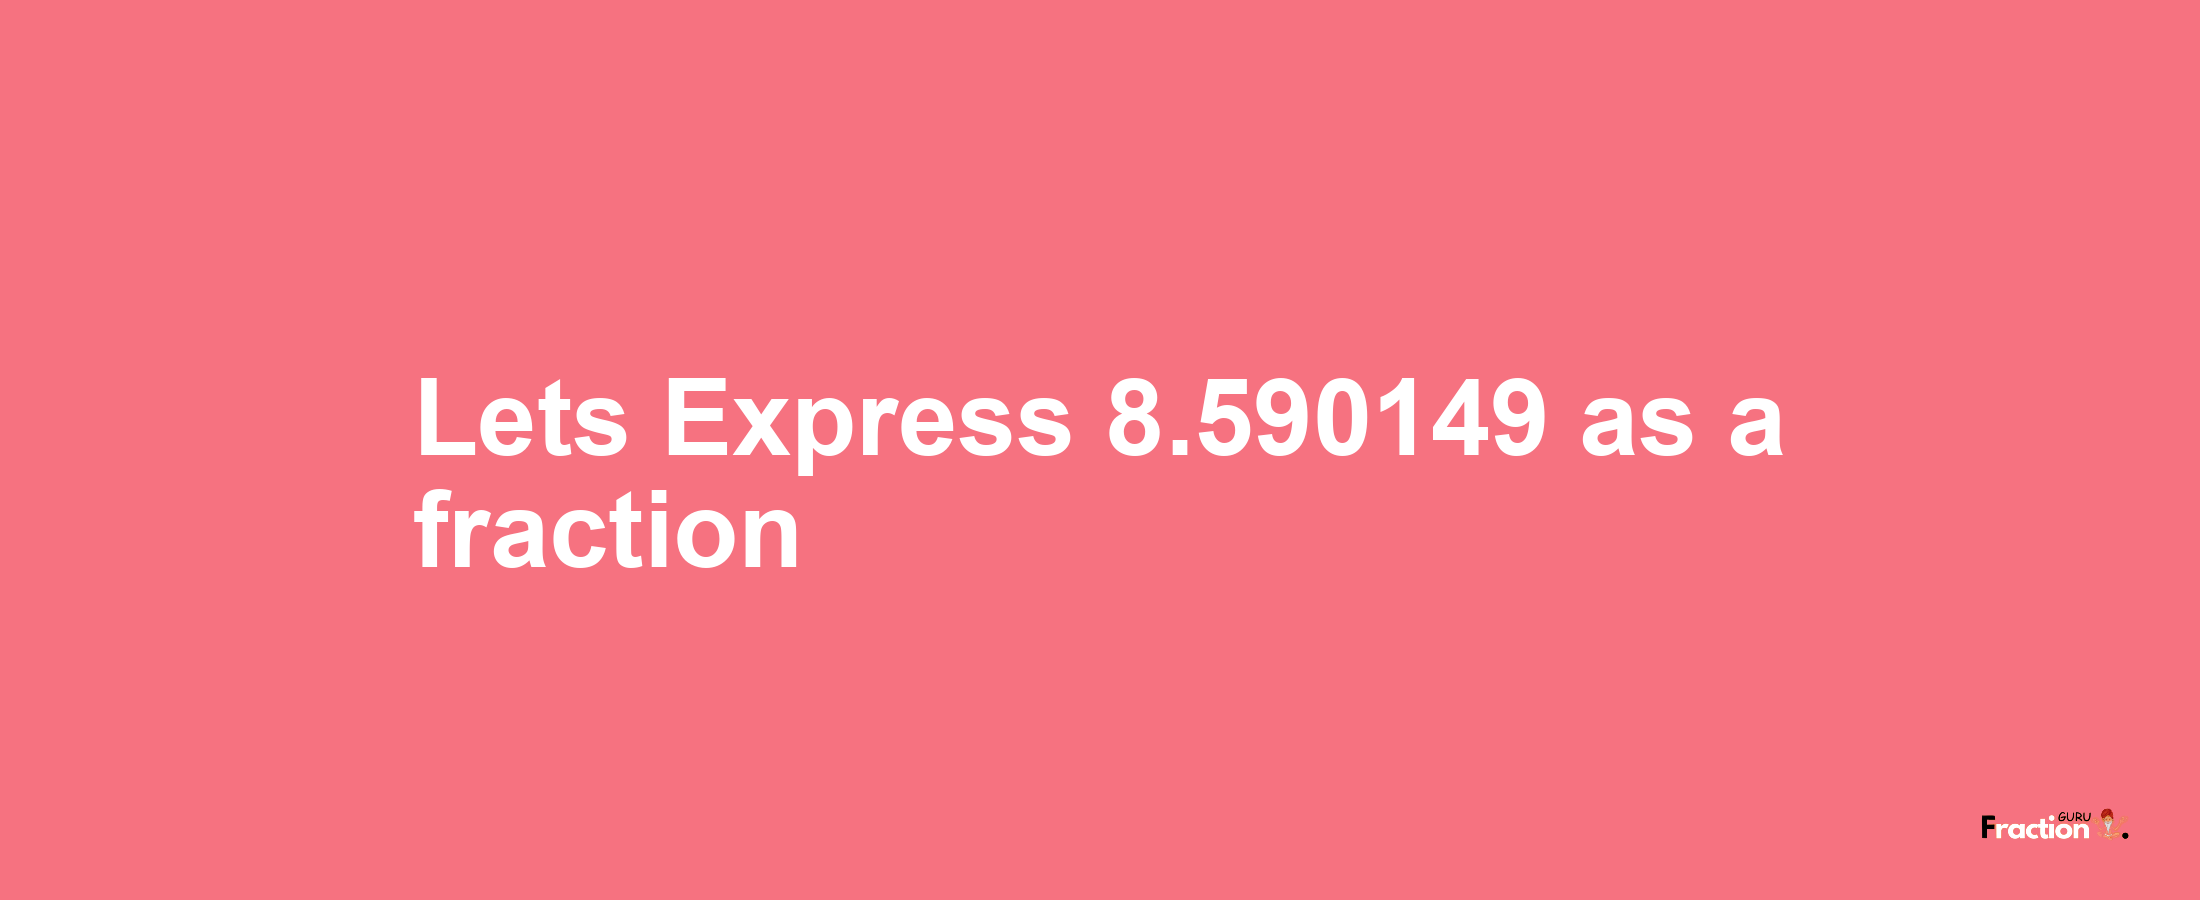 Lets Express 8.590149 as afraction